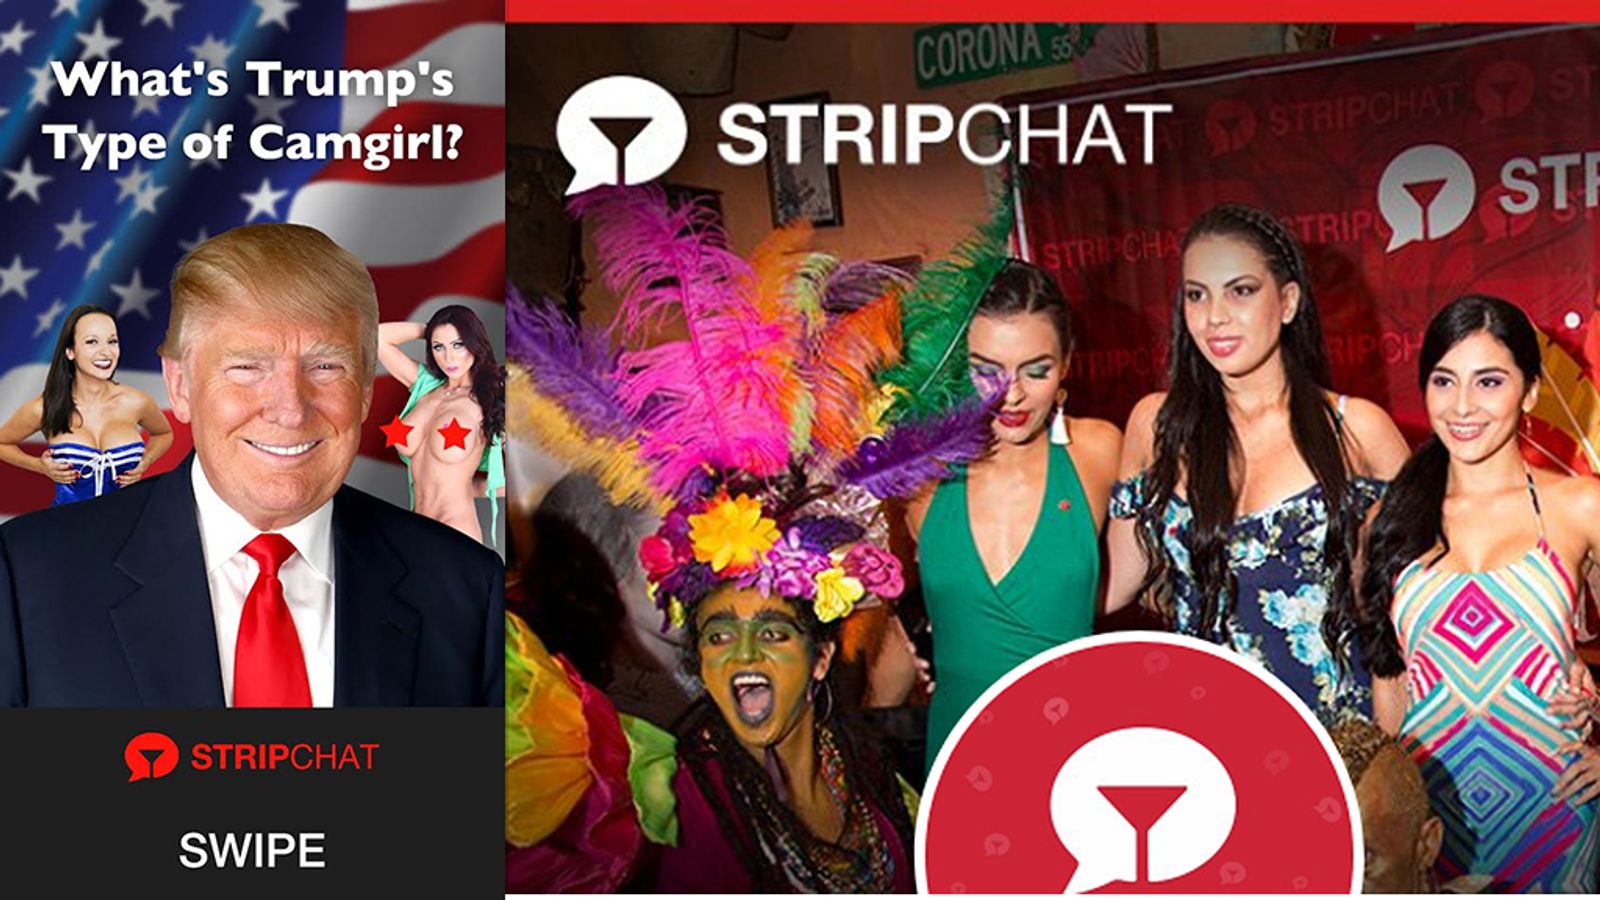 Stripchat Fan Poll: Who's Trump’s Favorite Type of Cam Girl?